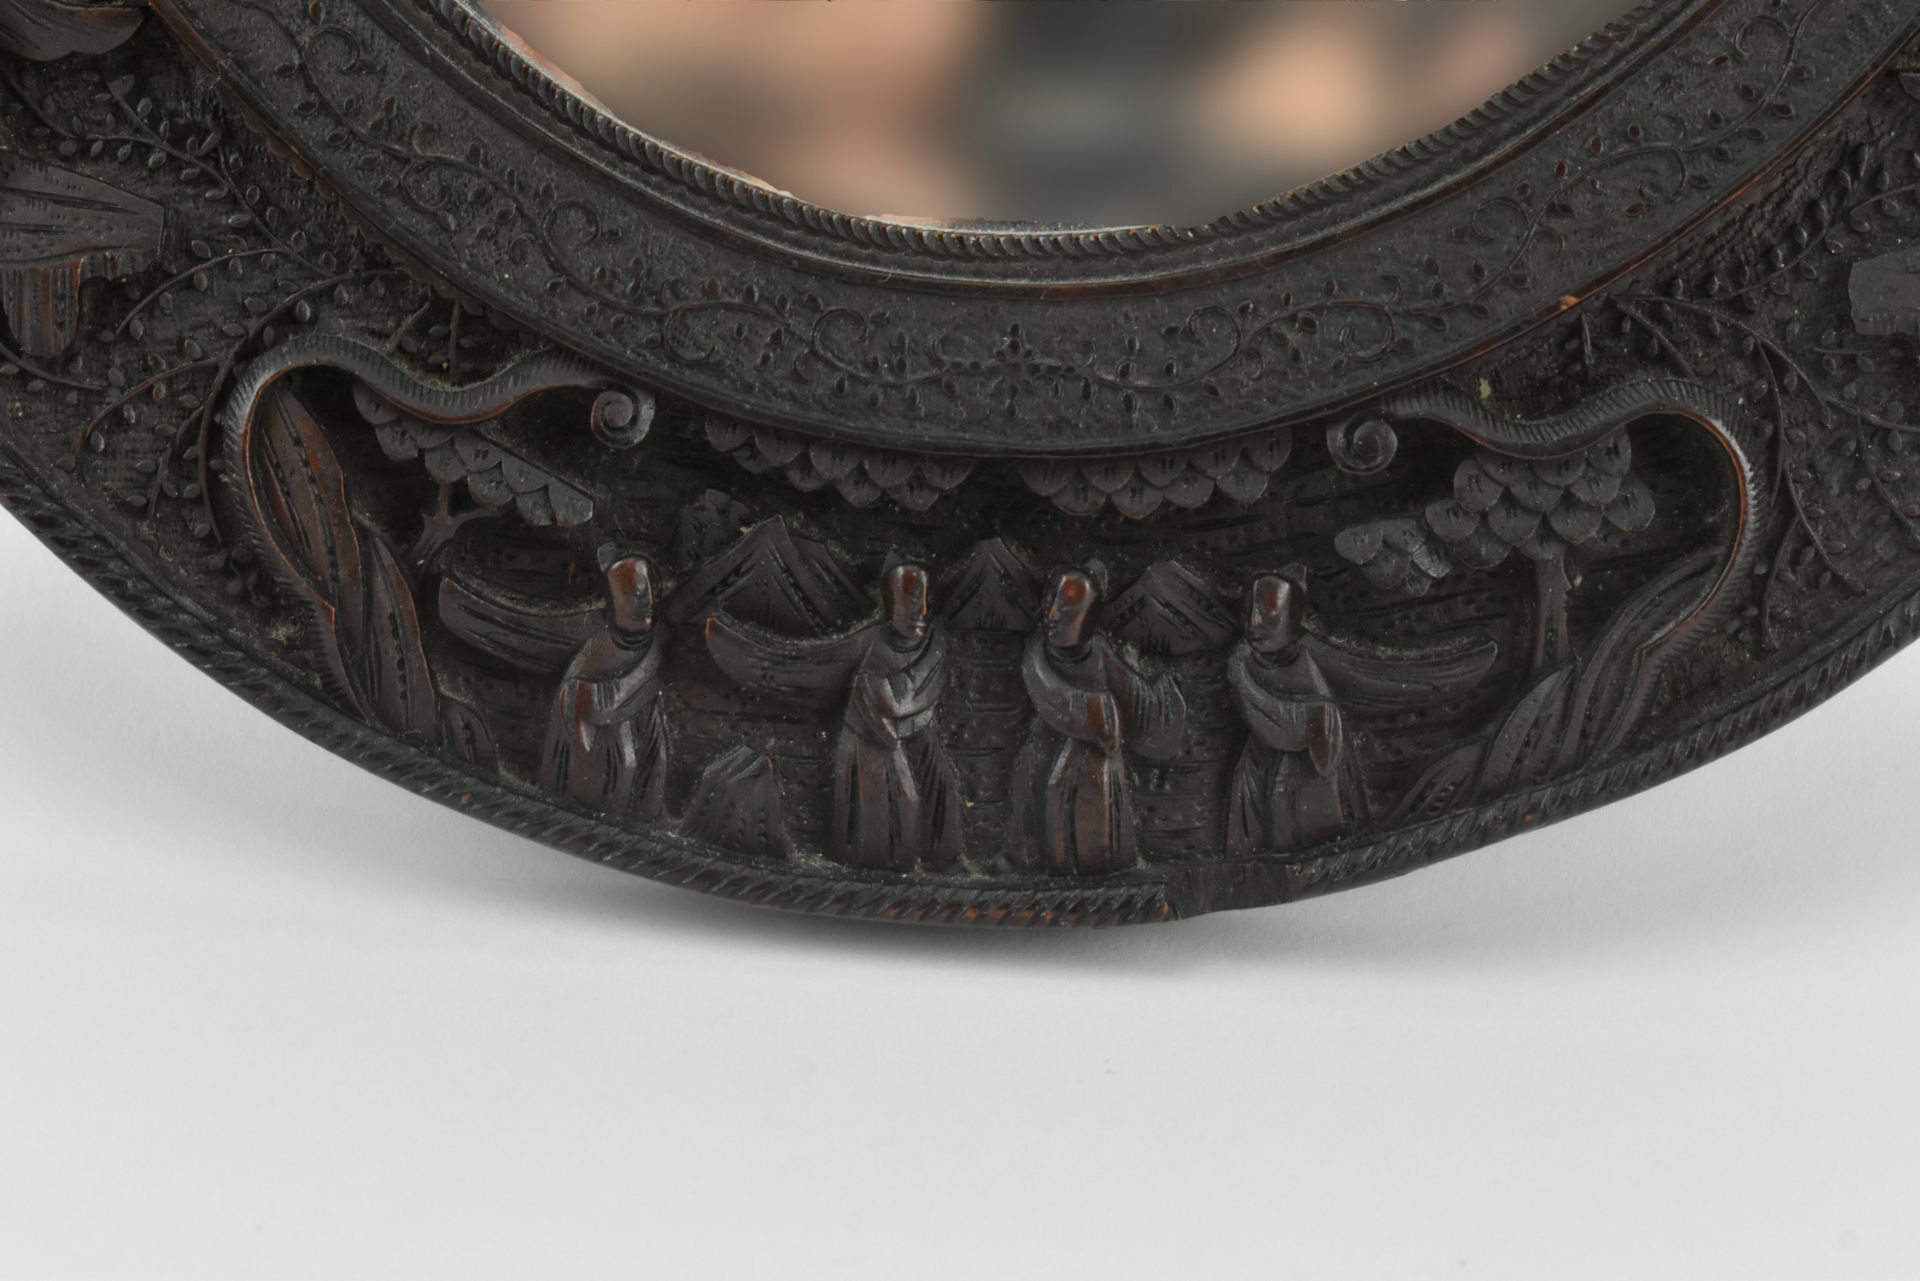 CHINESE WOODEN CARVED WALL MIRROR 民国 木框镜子 - Image 5 of 6